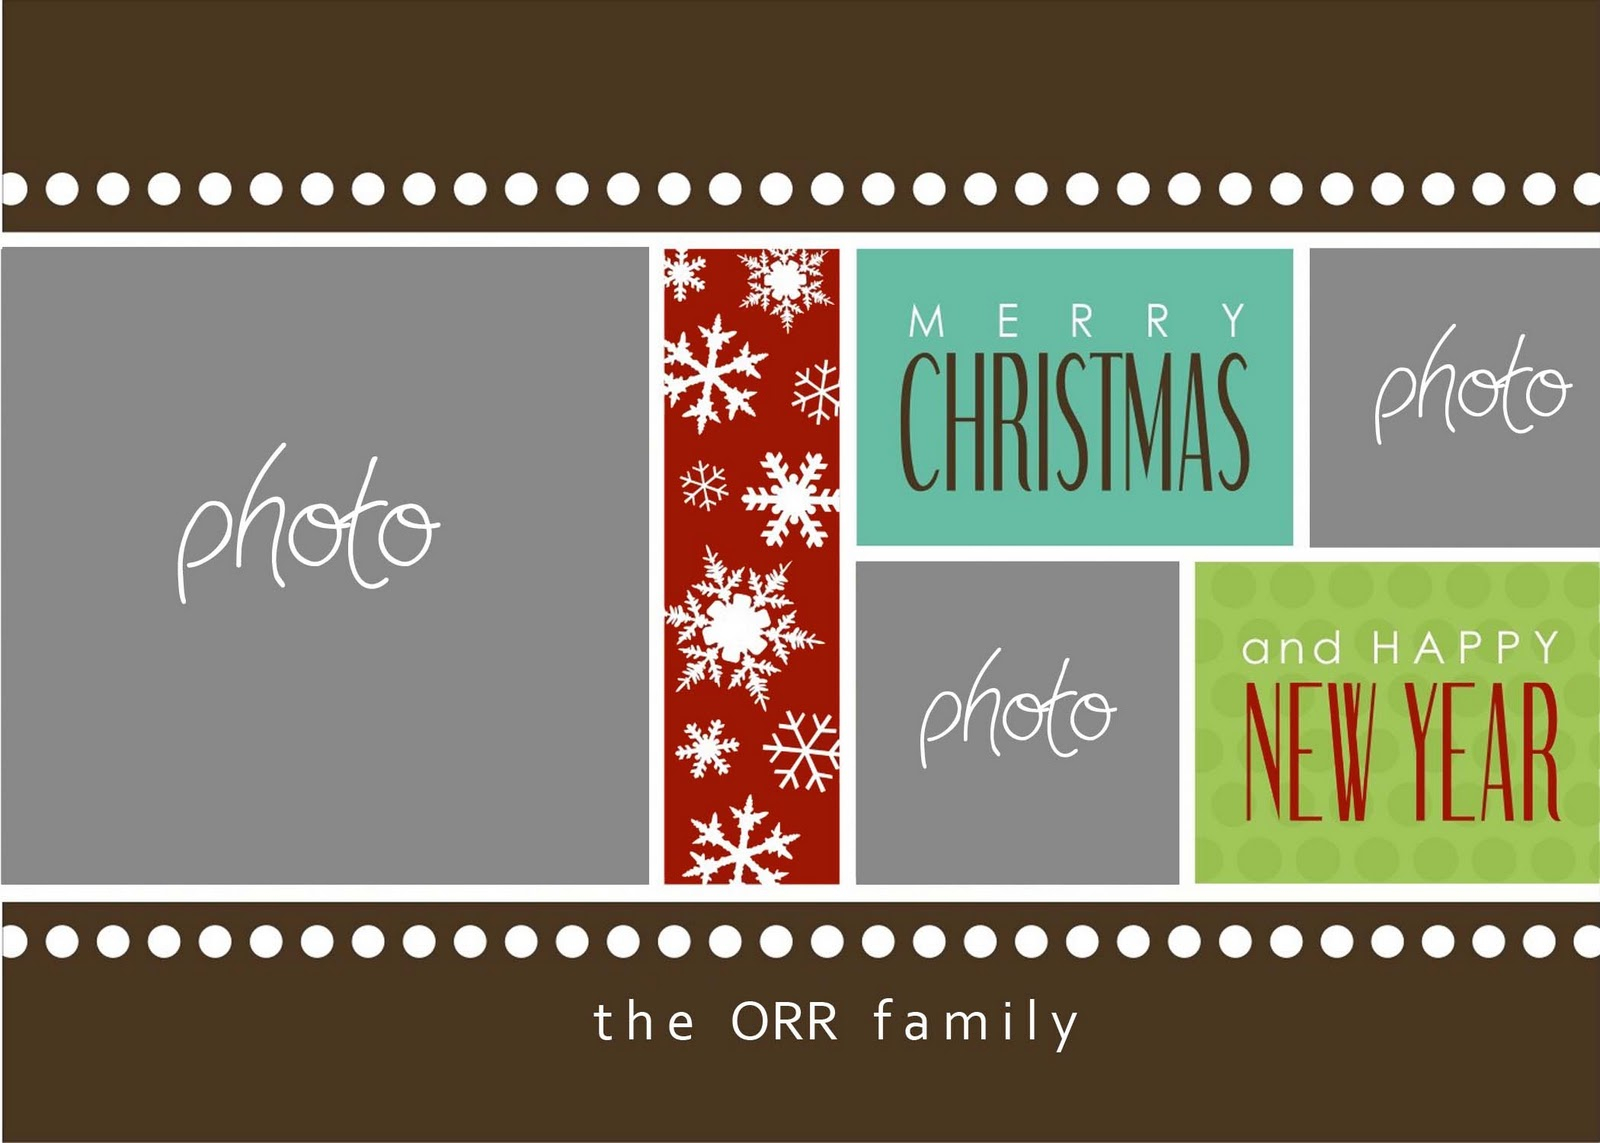 8 Free Photoshop Christmas Card Templates Images – Photoshop Within Christmas Photo Card Templates Photoshop